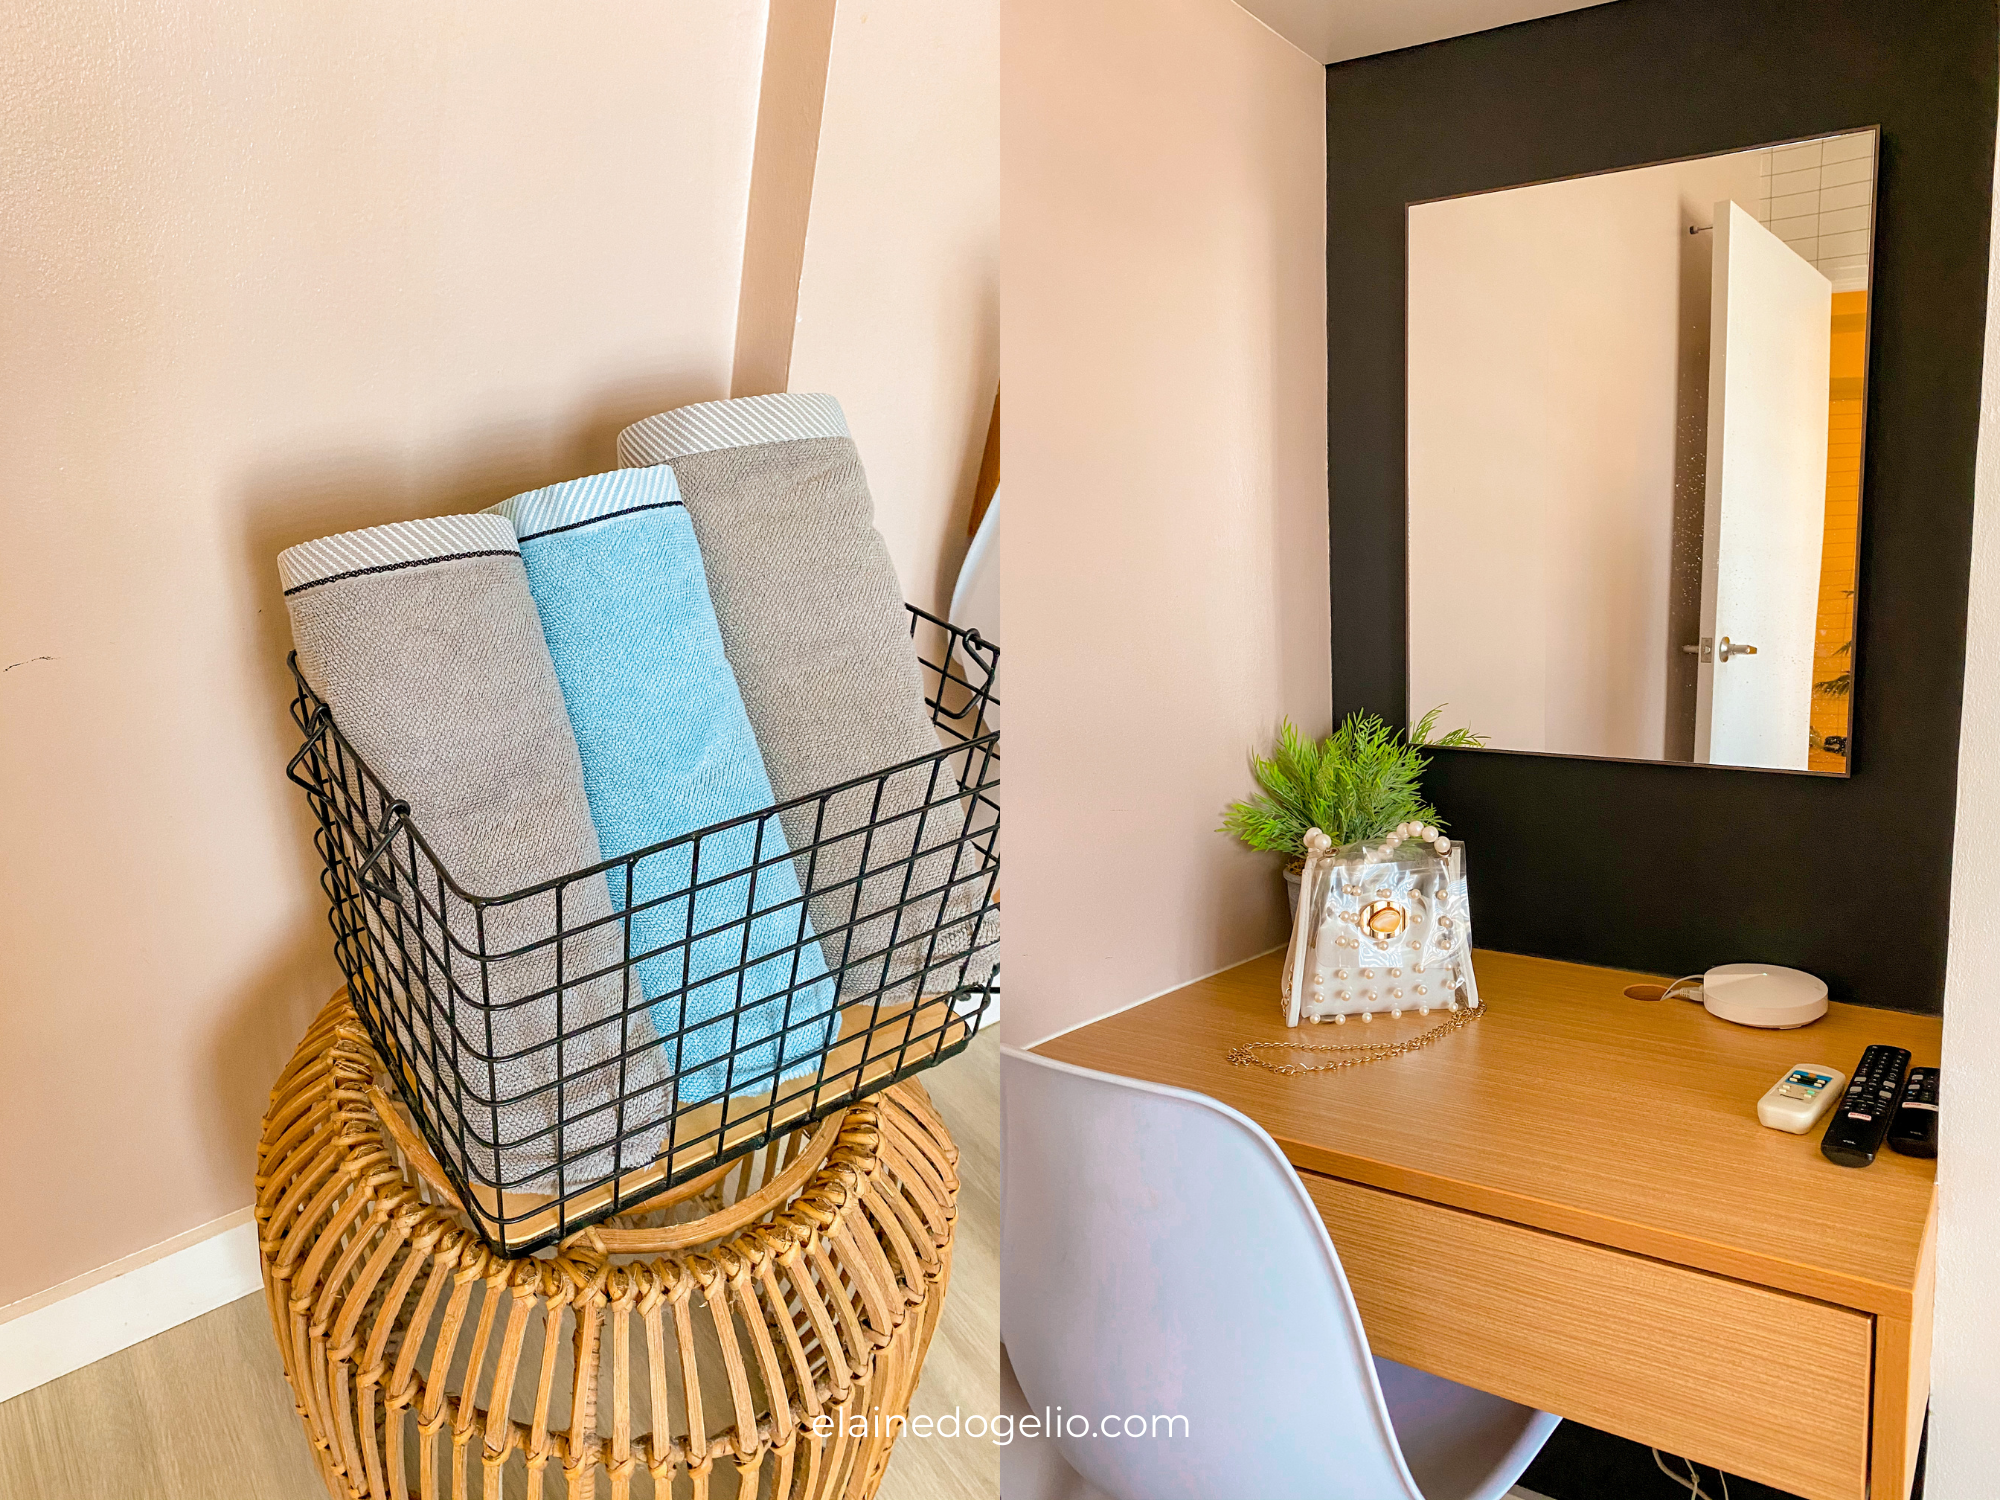 Nordic Inspired and Cozy Airbnb Staycation HyggePlus+ Cityland